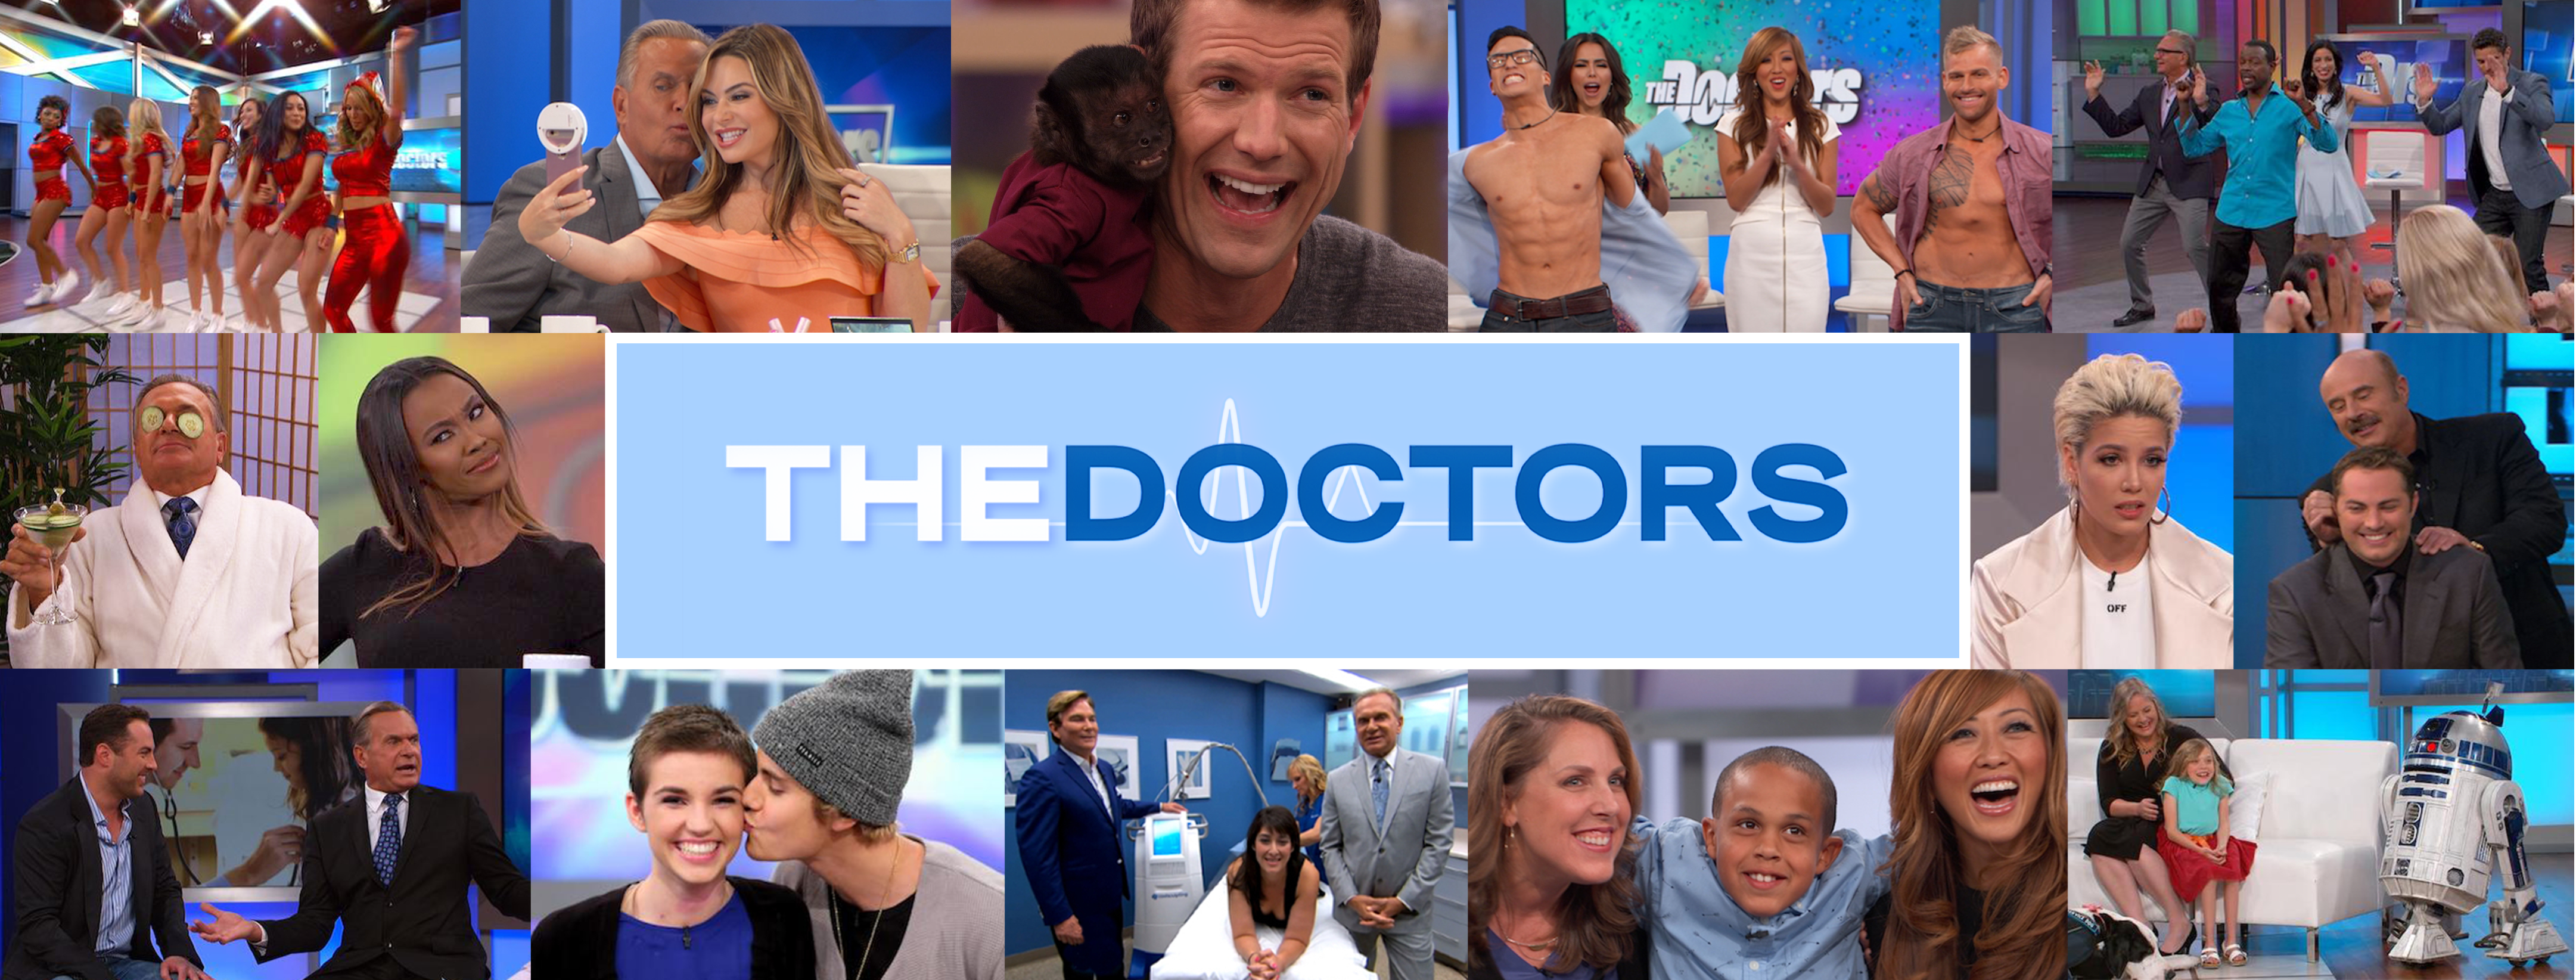 Chemical Burns From Deodorant The Doctors Tv Show